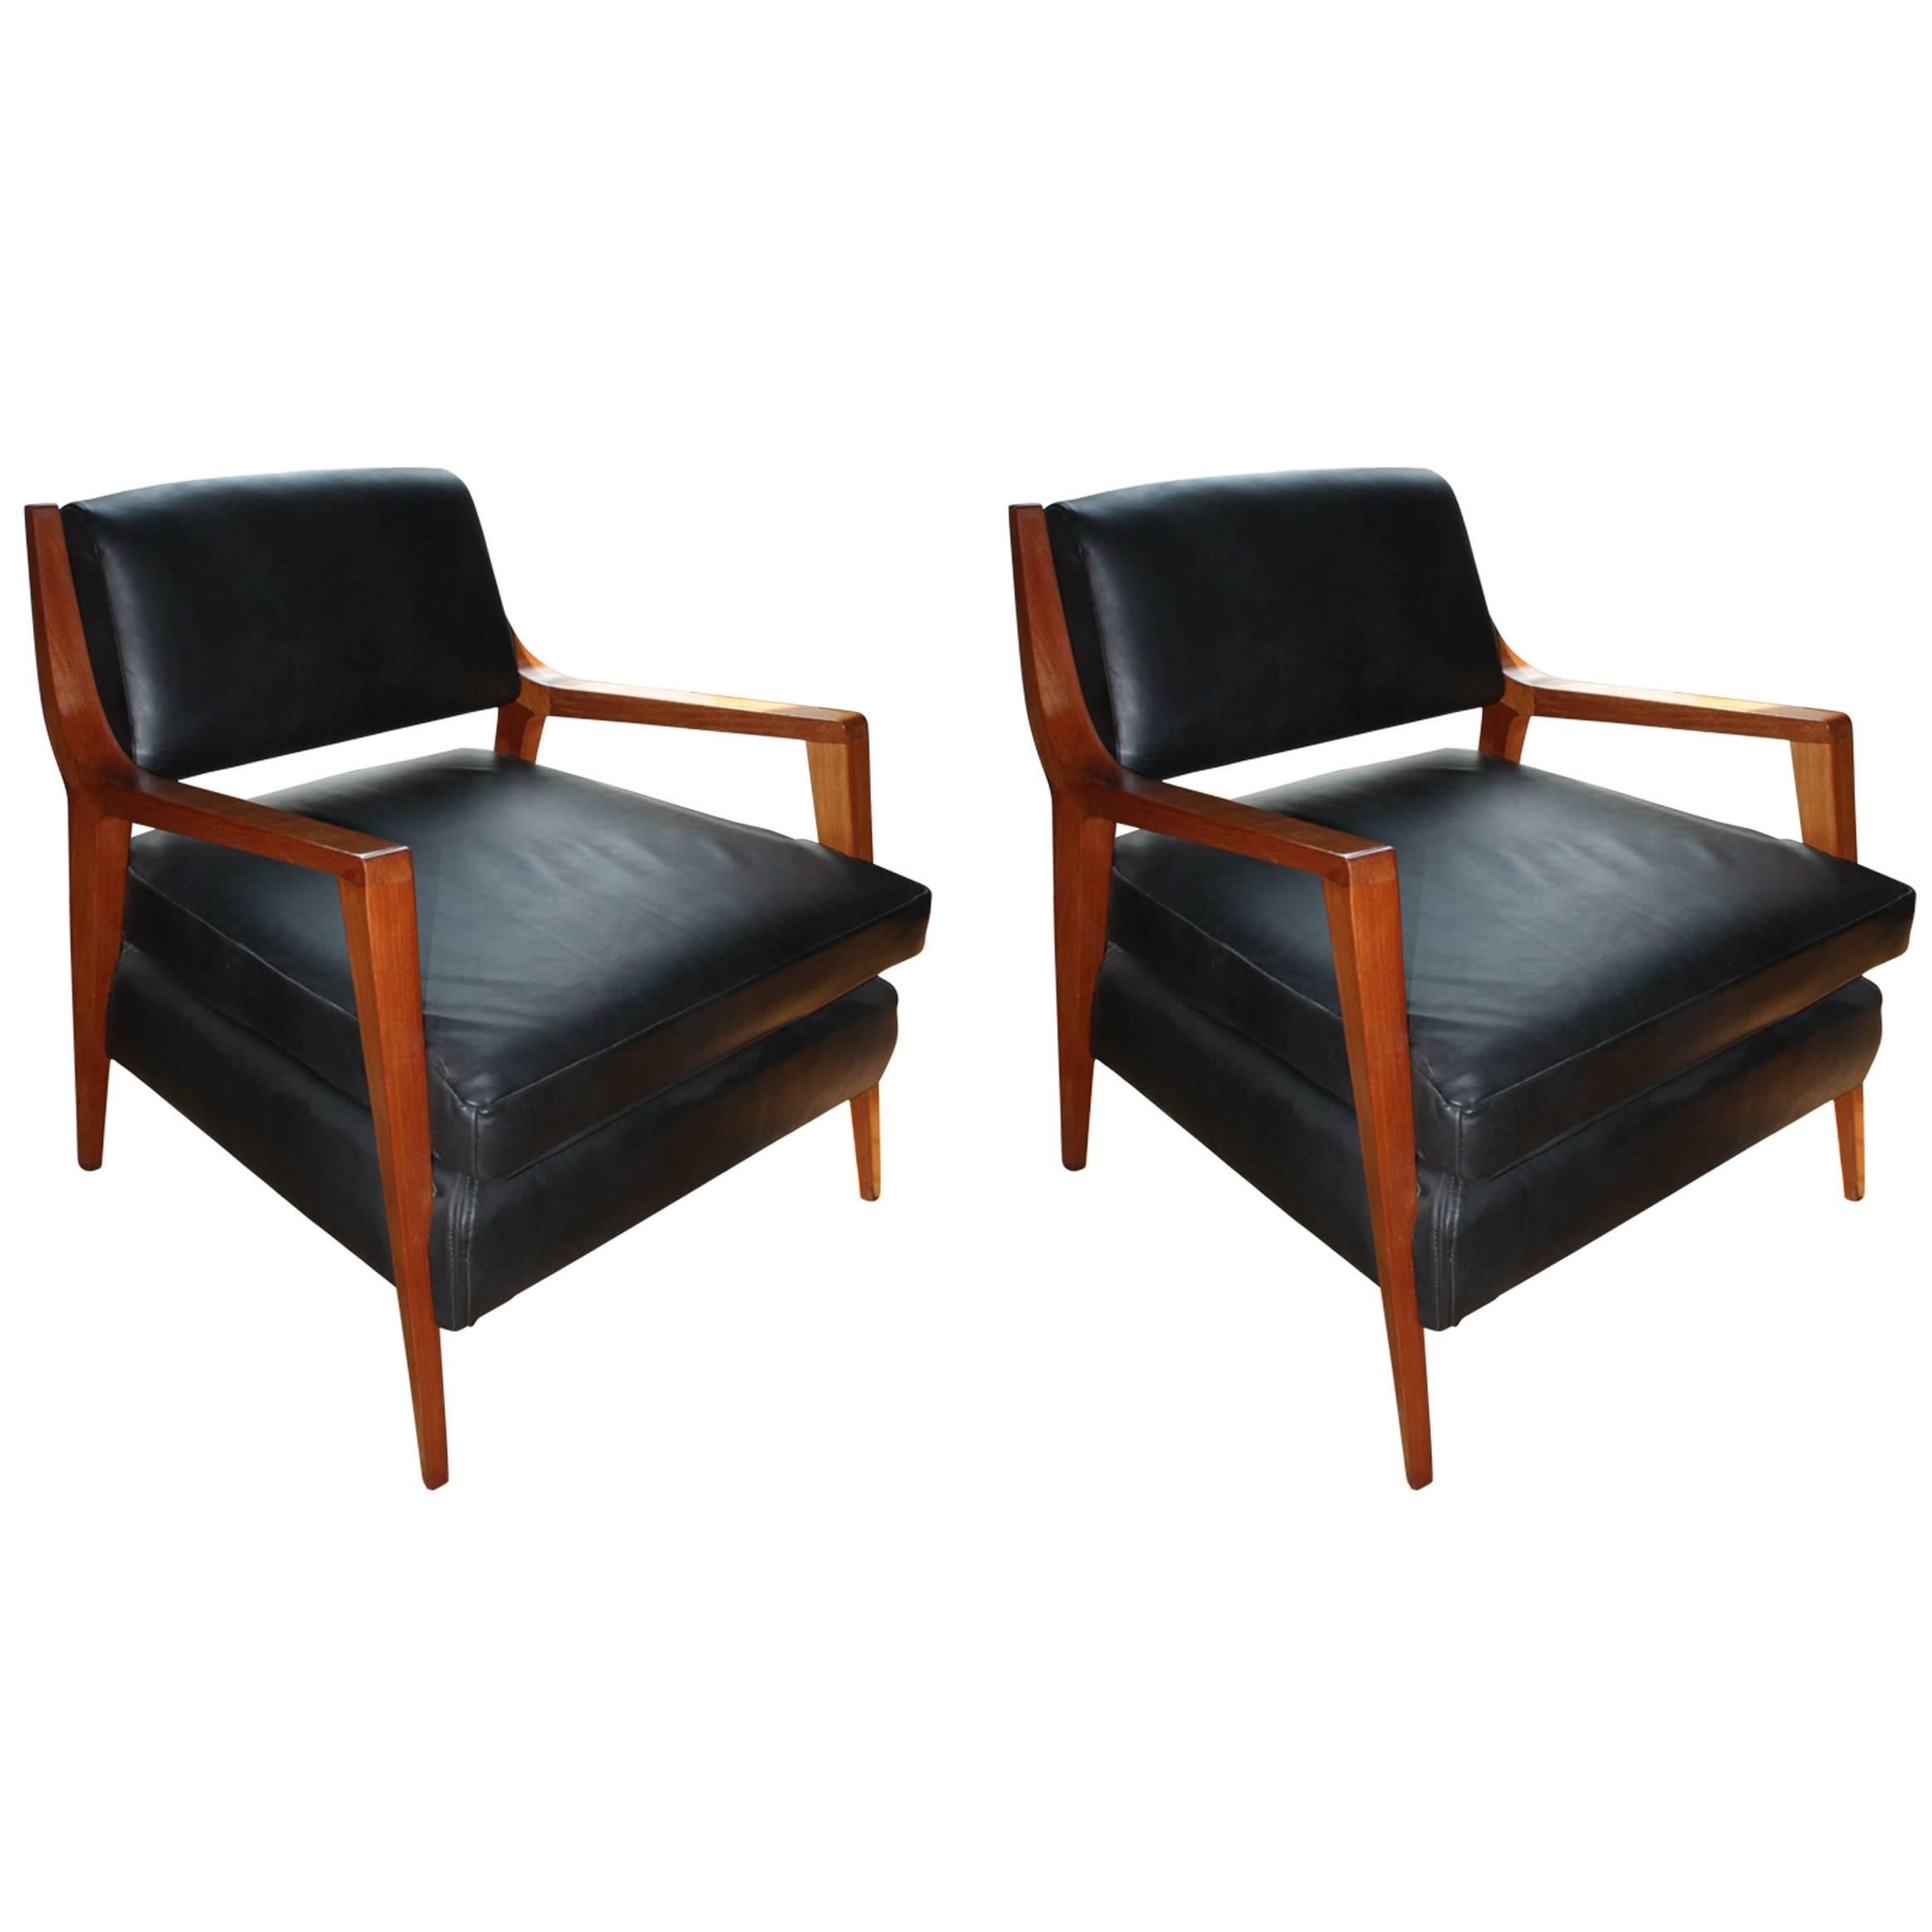 Pair of Van Beuren Chairs of Mahogany Wood with Black Leather Seats